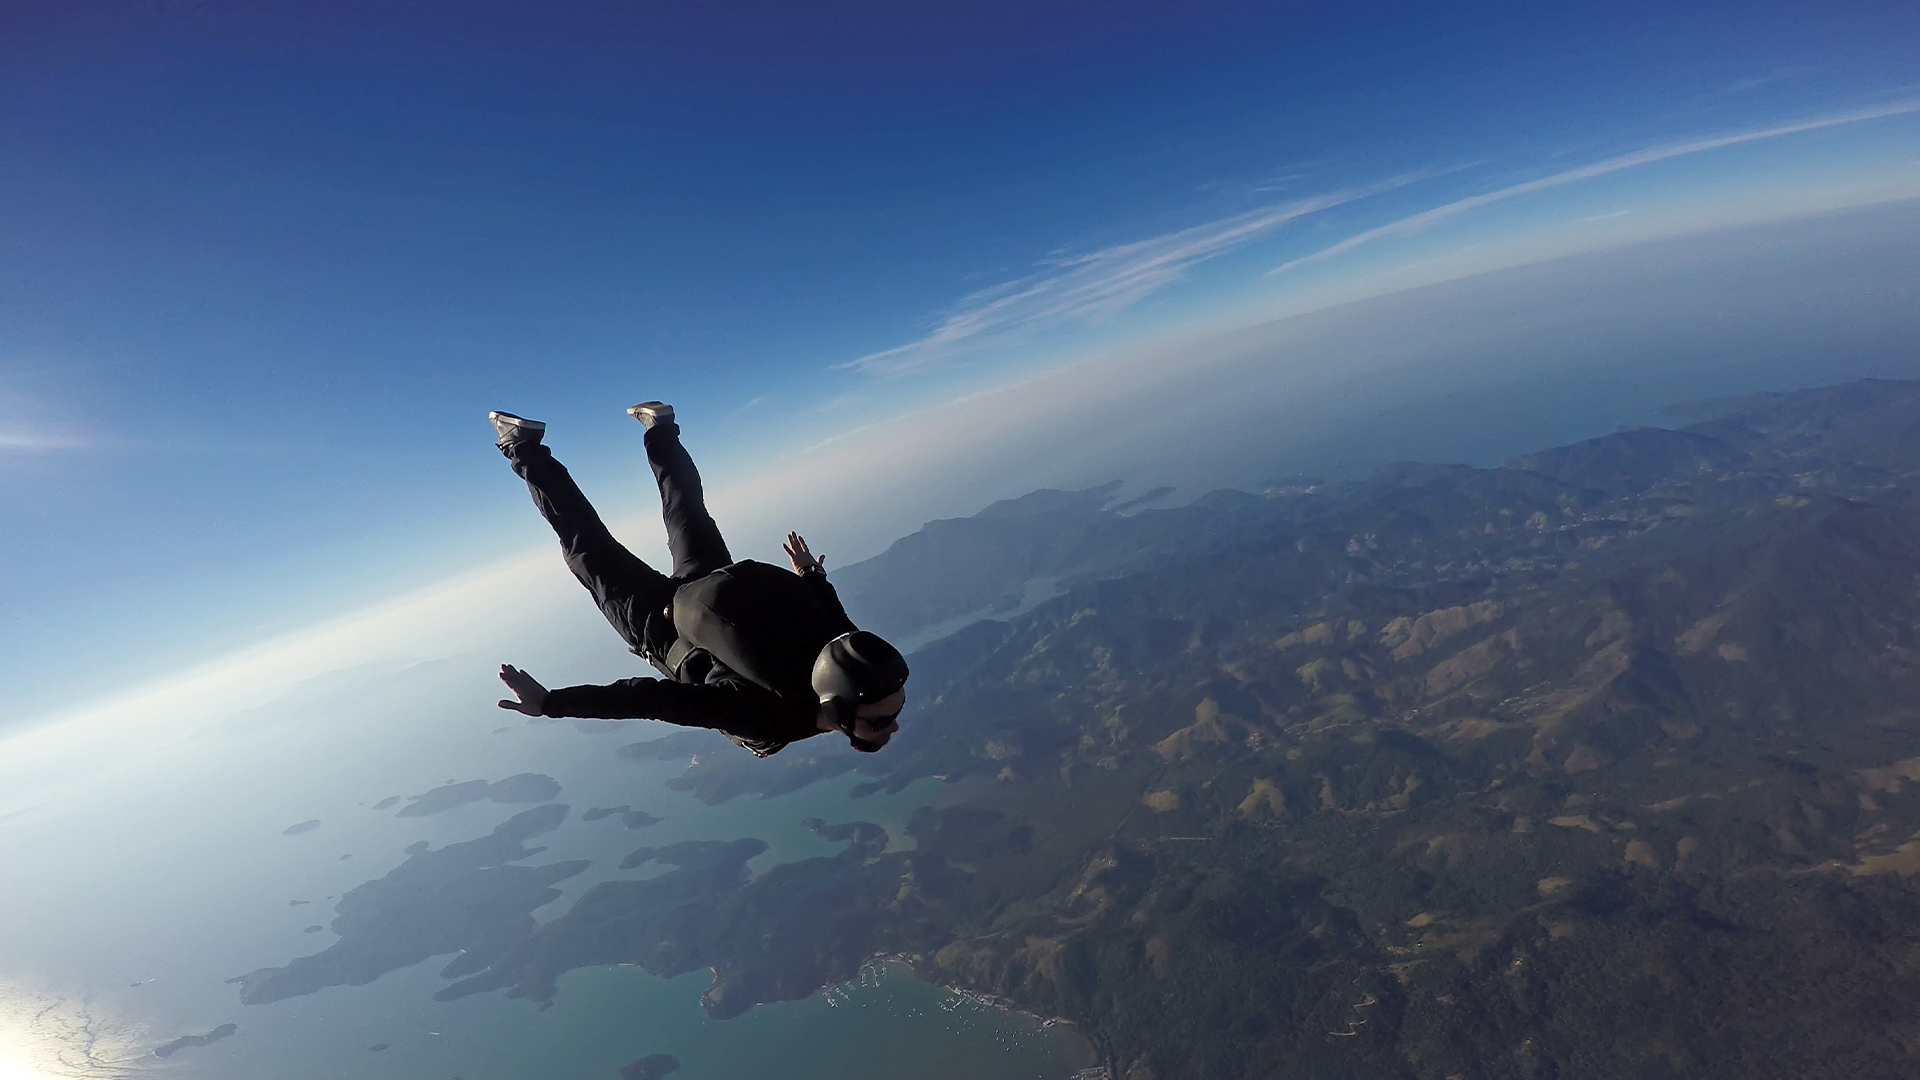 FREEFALL: Hurtling your way between what was and what’s next.